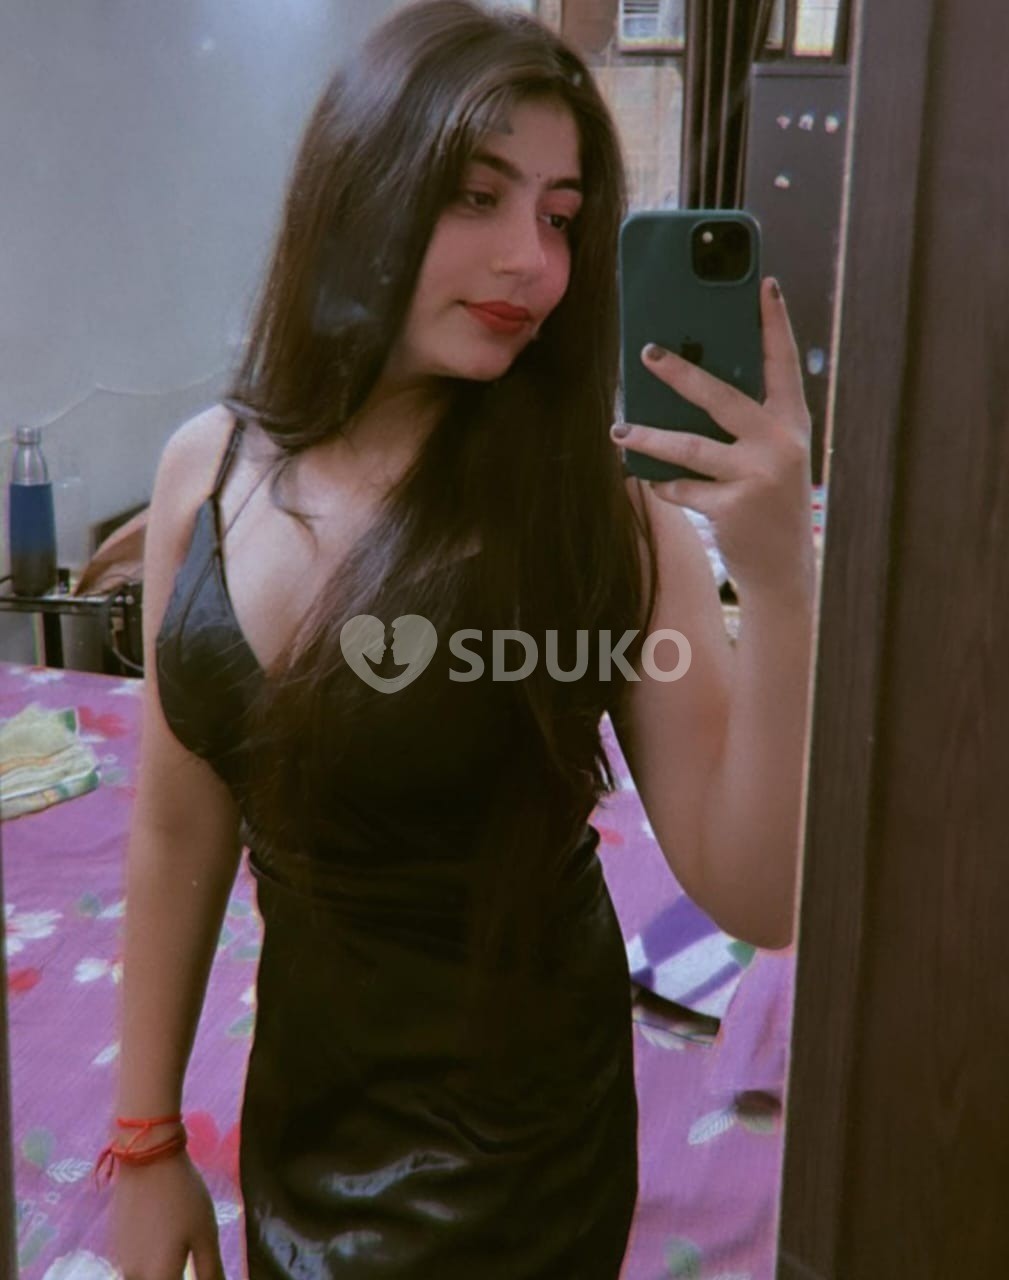 Chandrapur ⭐ ⭐ Best Vvip High √√Profile College And Bhabhis Safe Escort Service Available